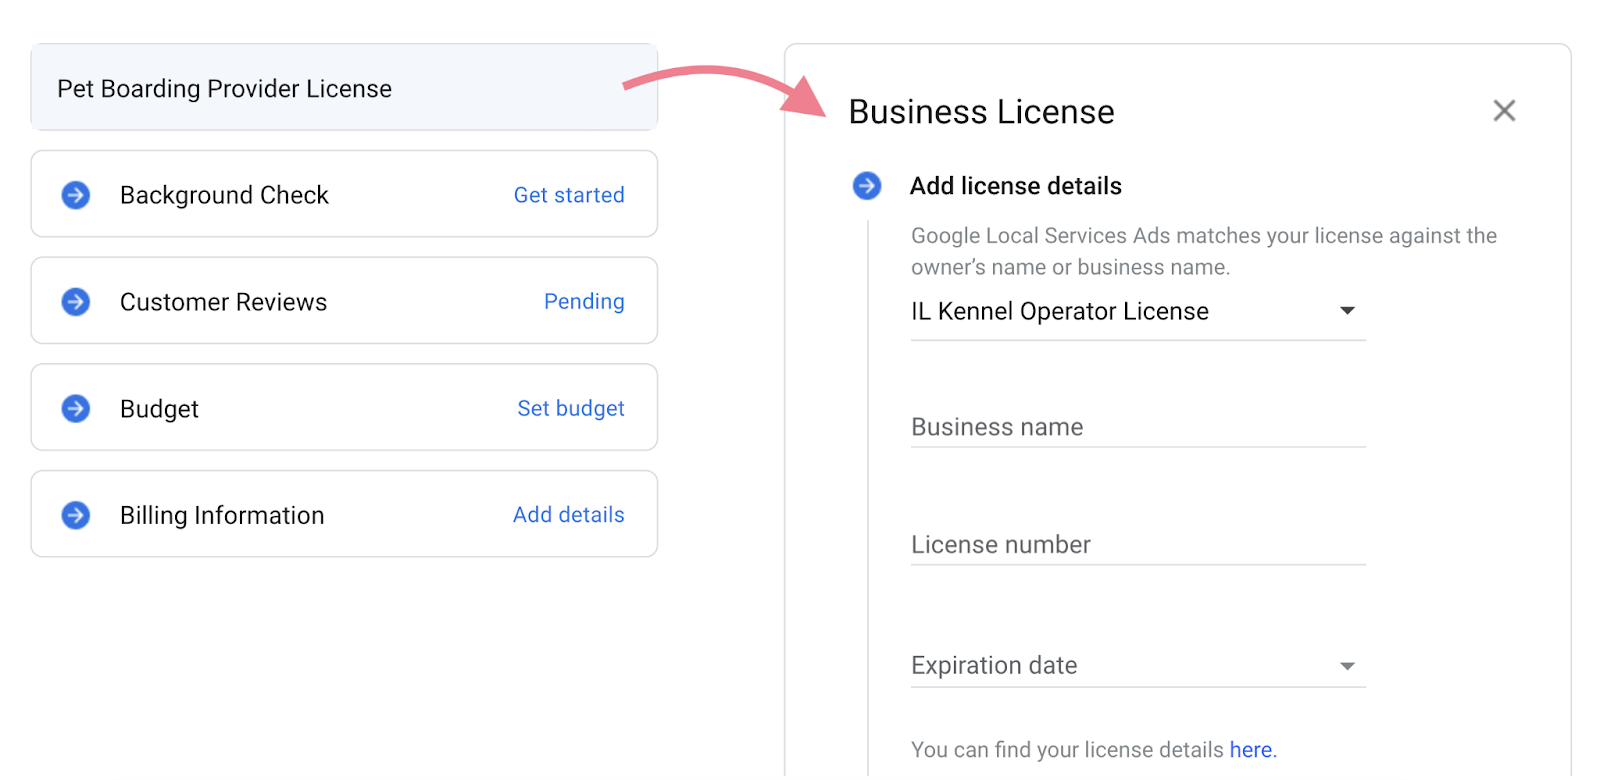 Business License page